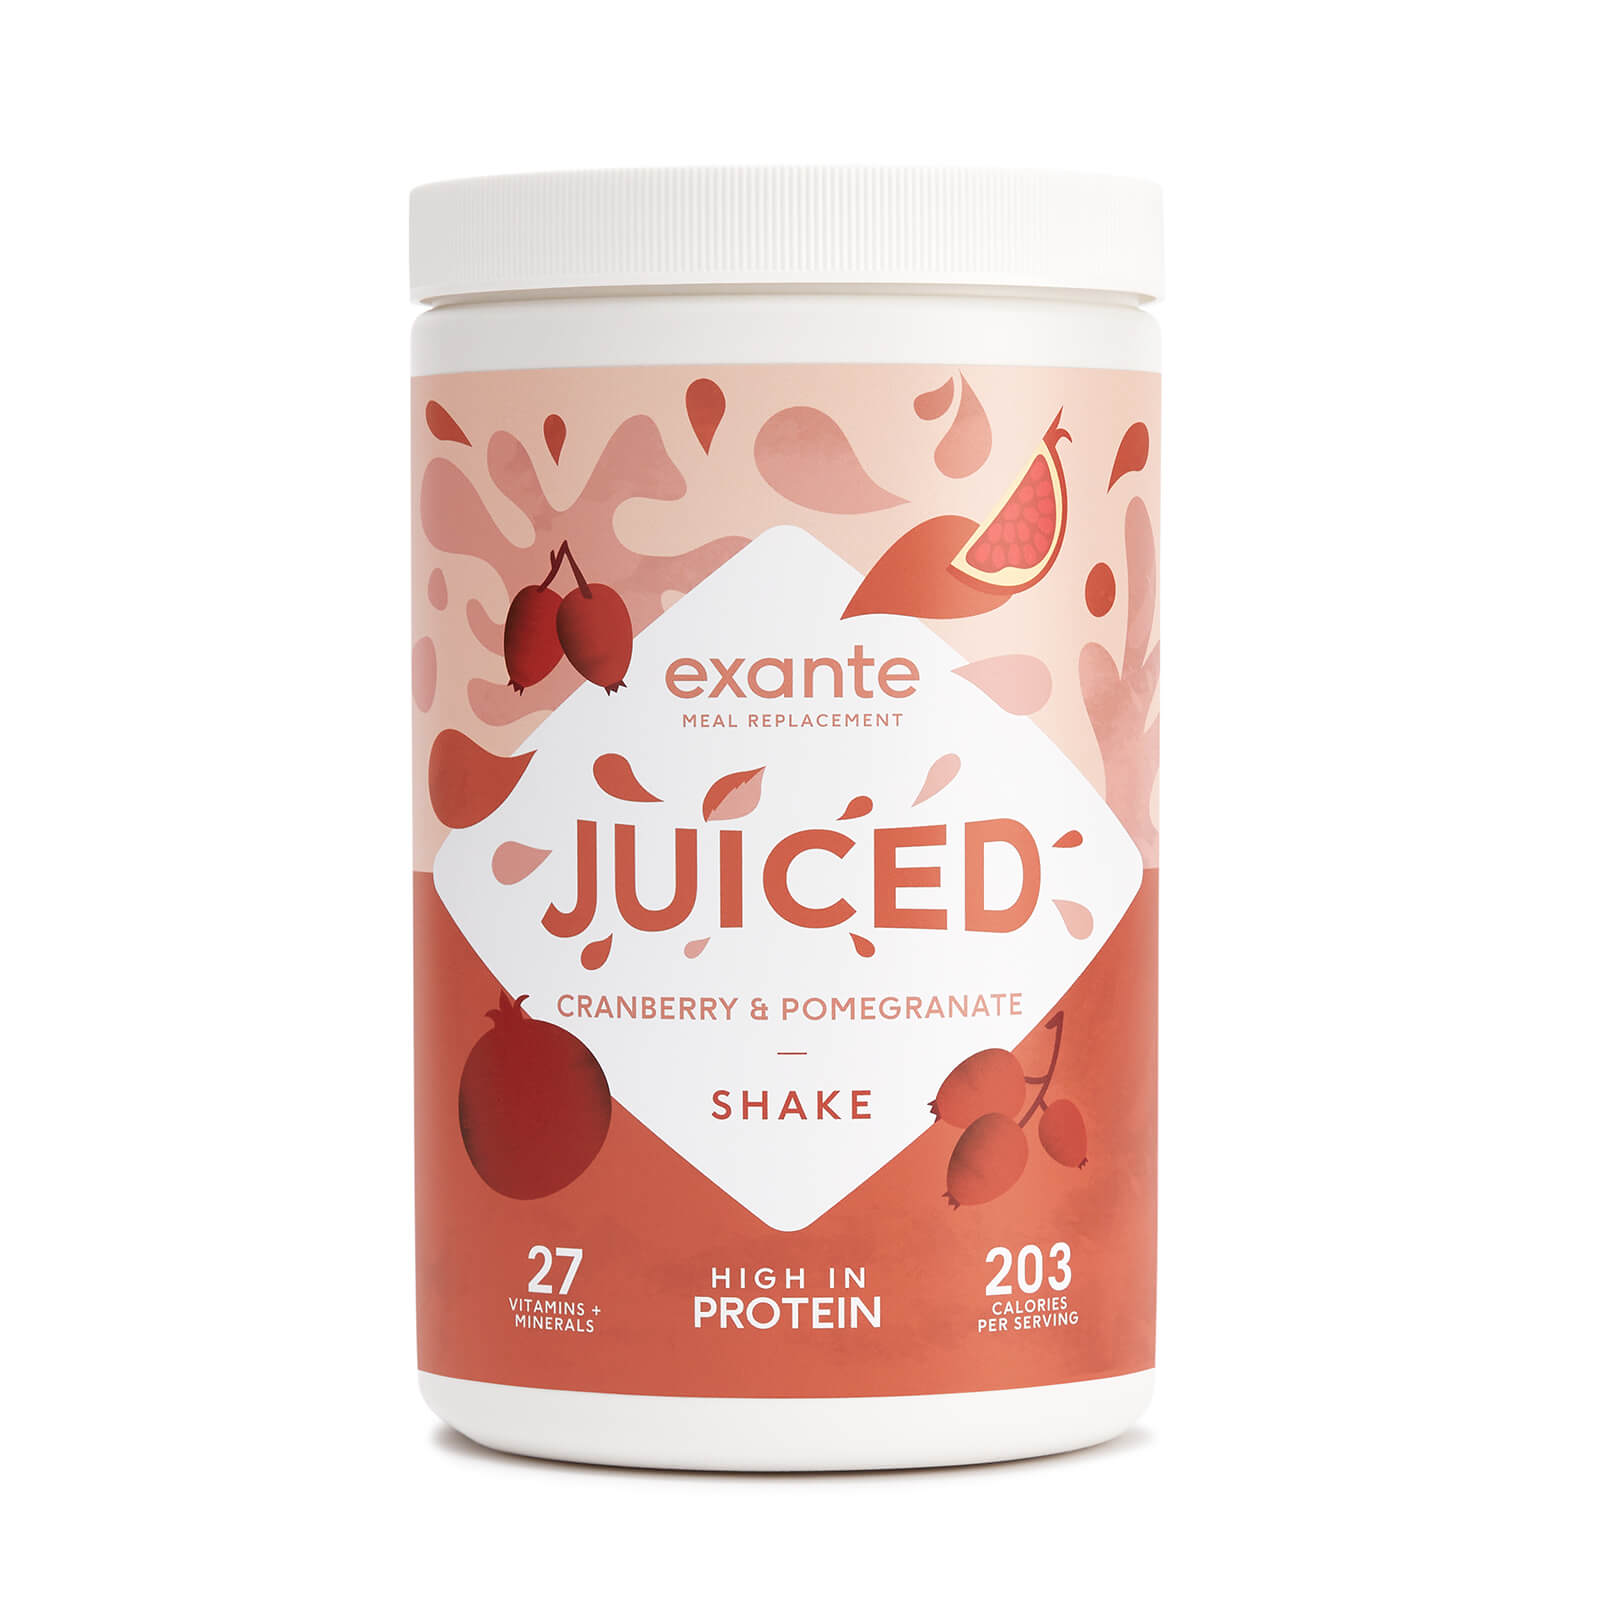 exante Diet Cranberry & Pomegranate JUICED Meal Replacement Shake 10 Serve Tub